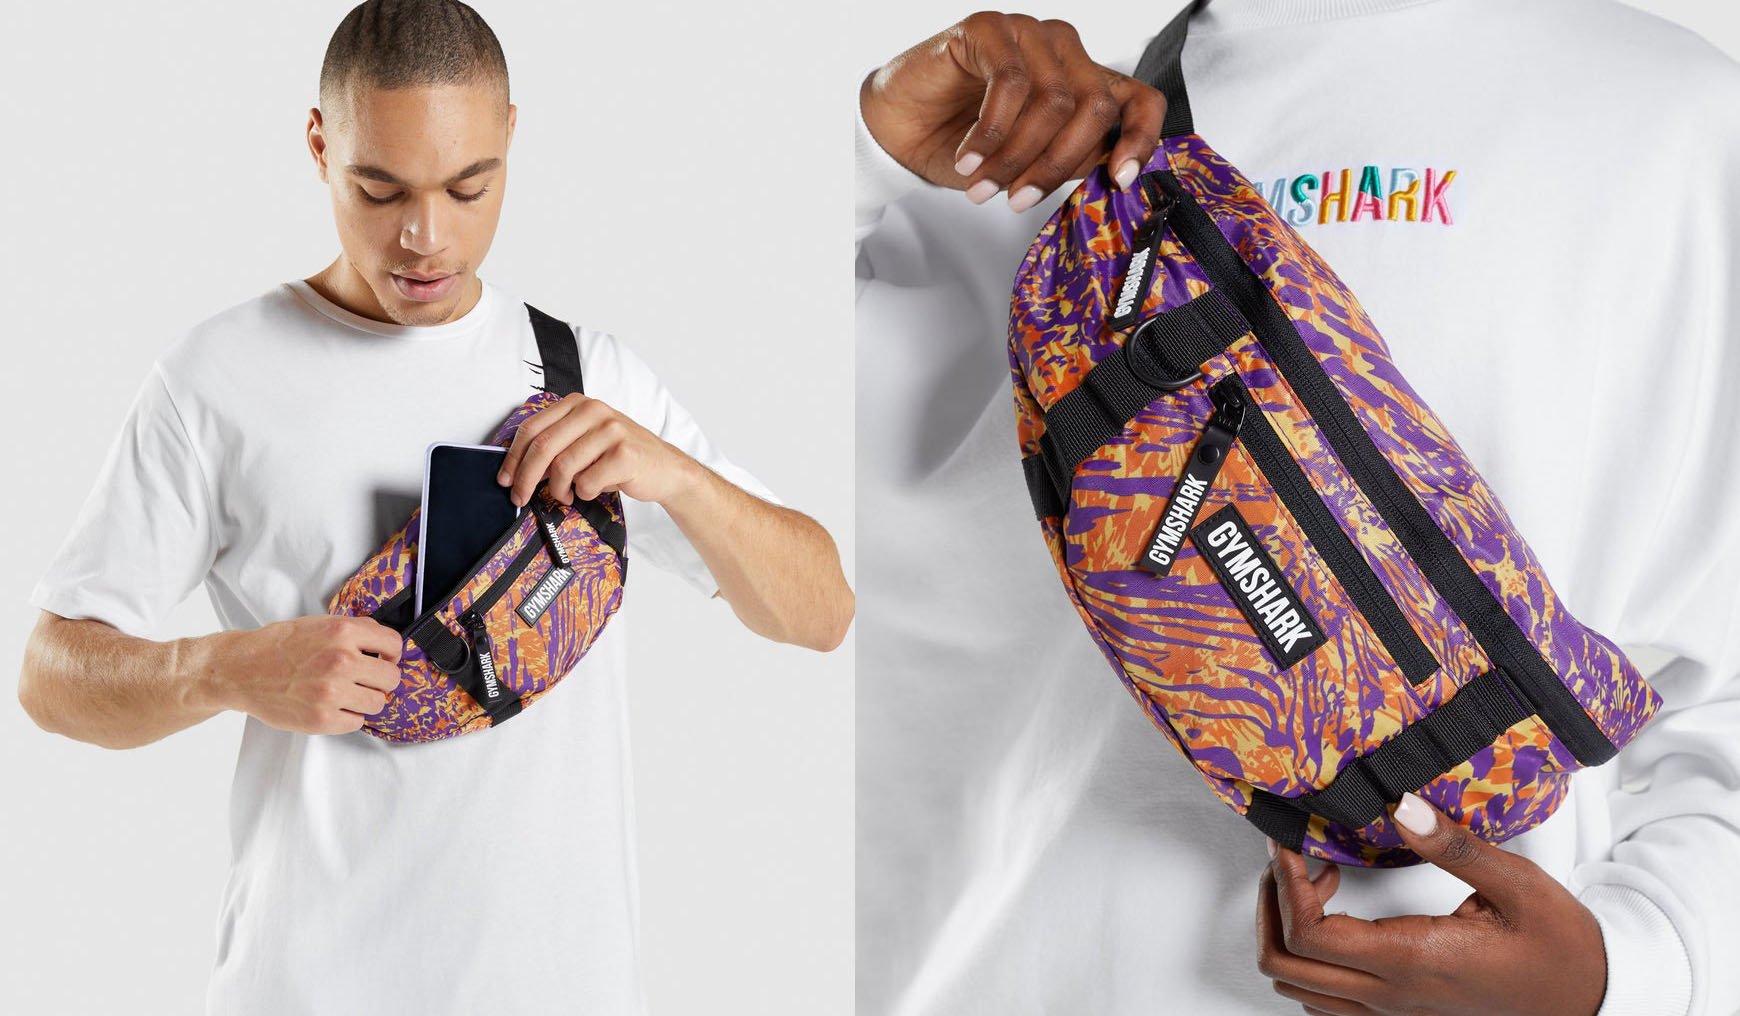 A unisex sling bag from activewear label Gymshark, the Manimal features a bold print in purple and orange colors and an adjustable body strap